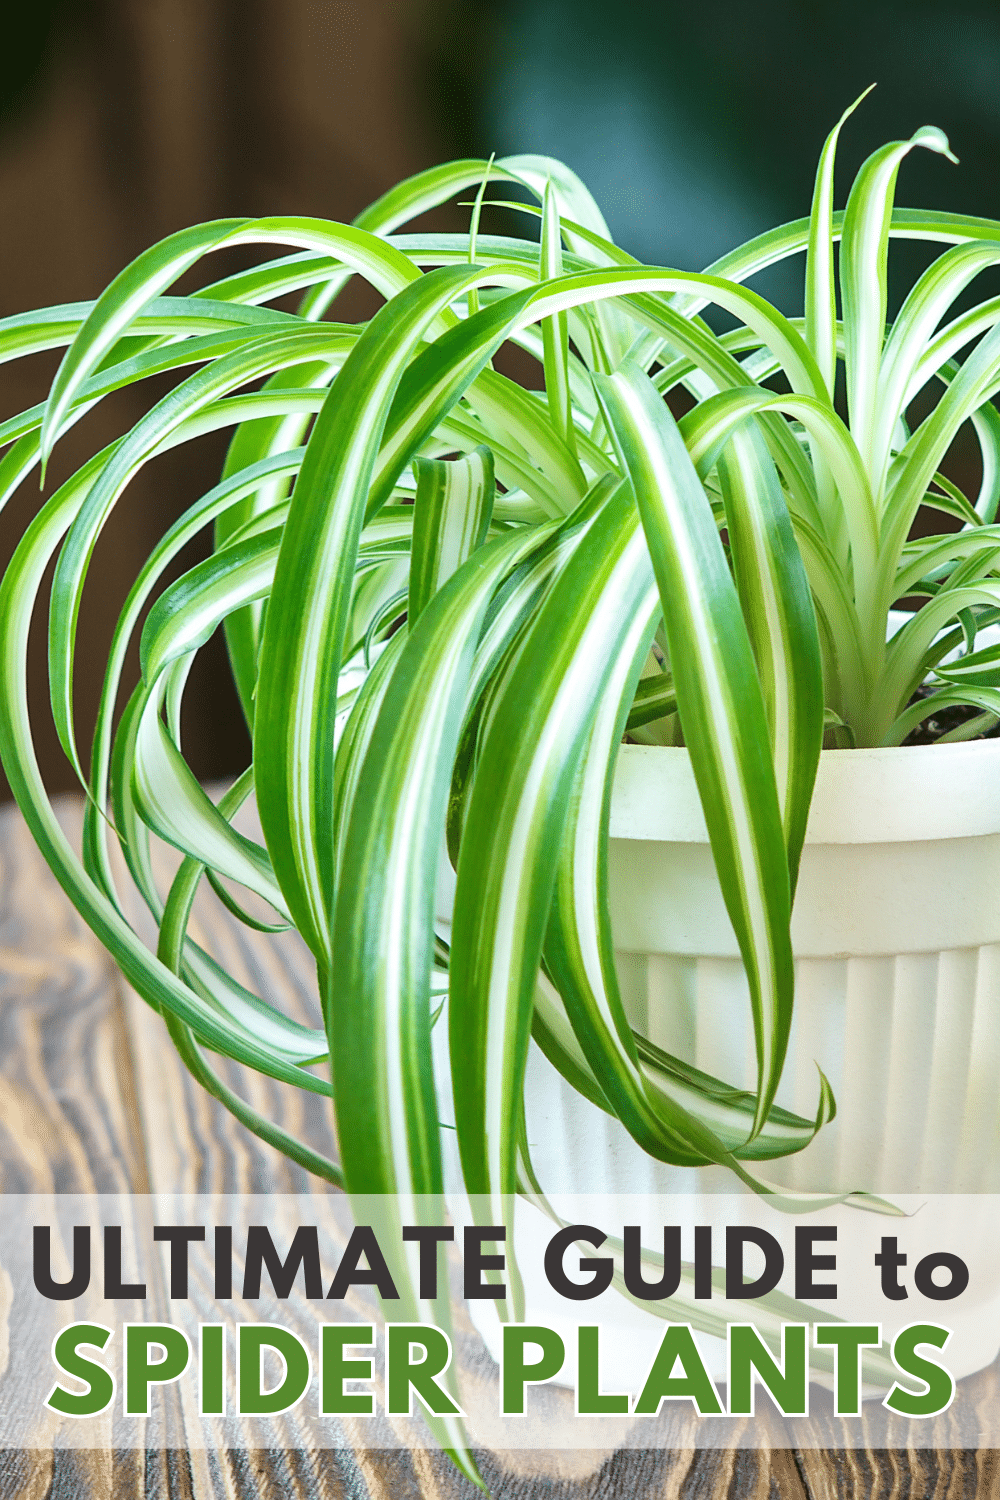 Ultimate Guide to Spider Plants image.